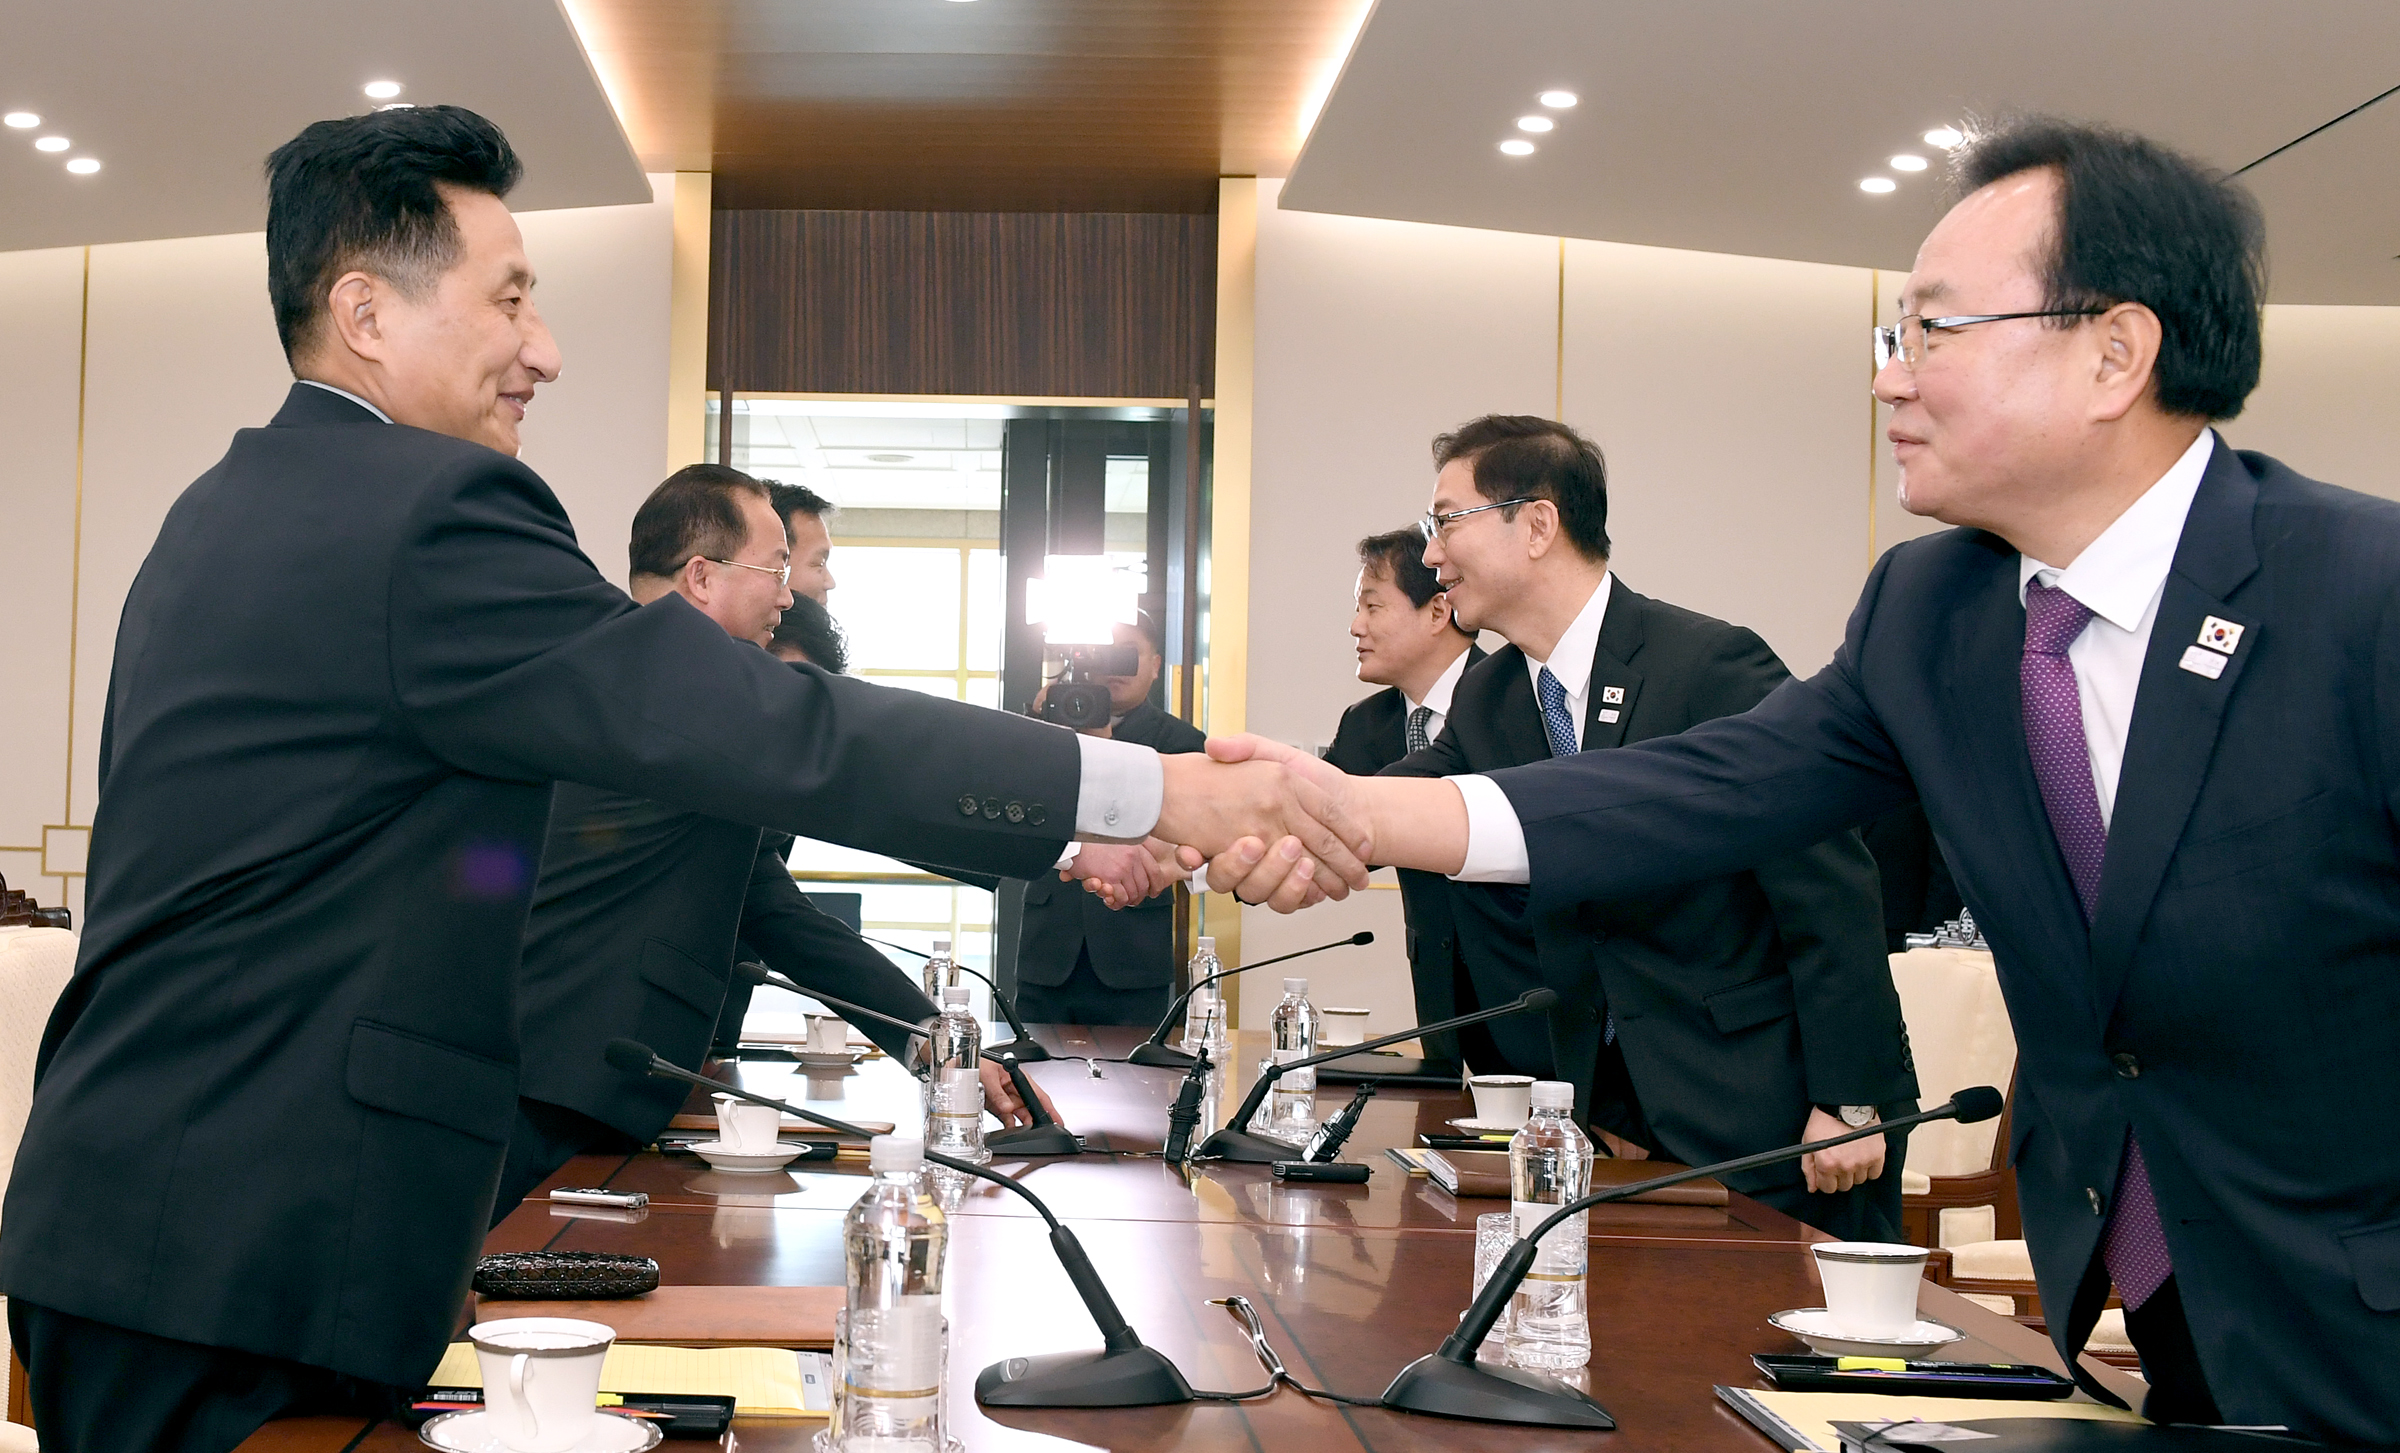 South Korean Vice Unification Minister Chun Hae-sung, center right, shakes hands with the head of North Korean delegation Jon Jong Su during their meeting at Panmunjom in the Demilitarized Zone in Paju, South Korea, Wednesday, Jan. 17, 2018.